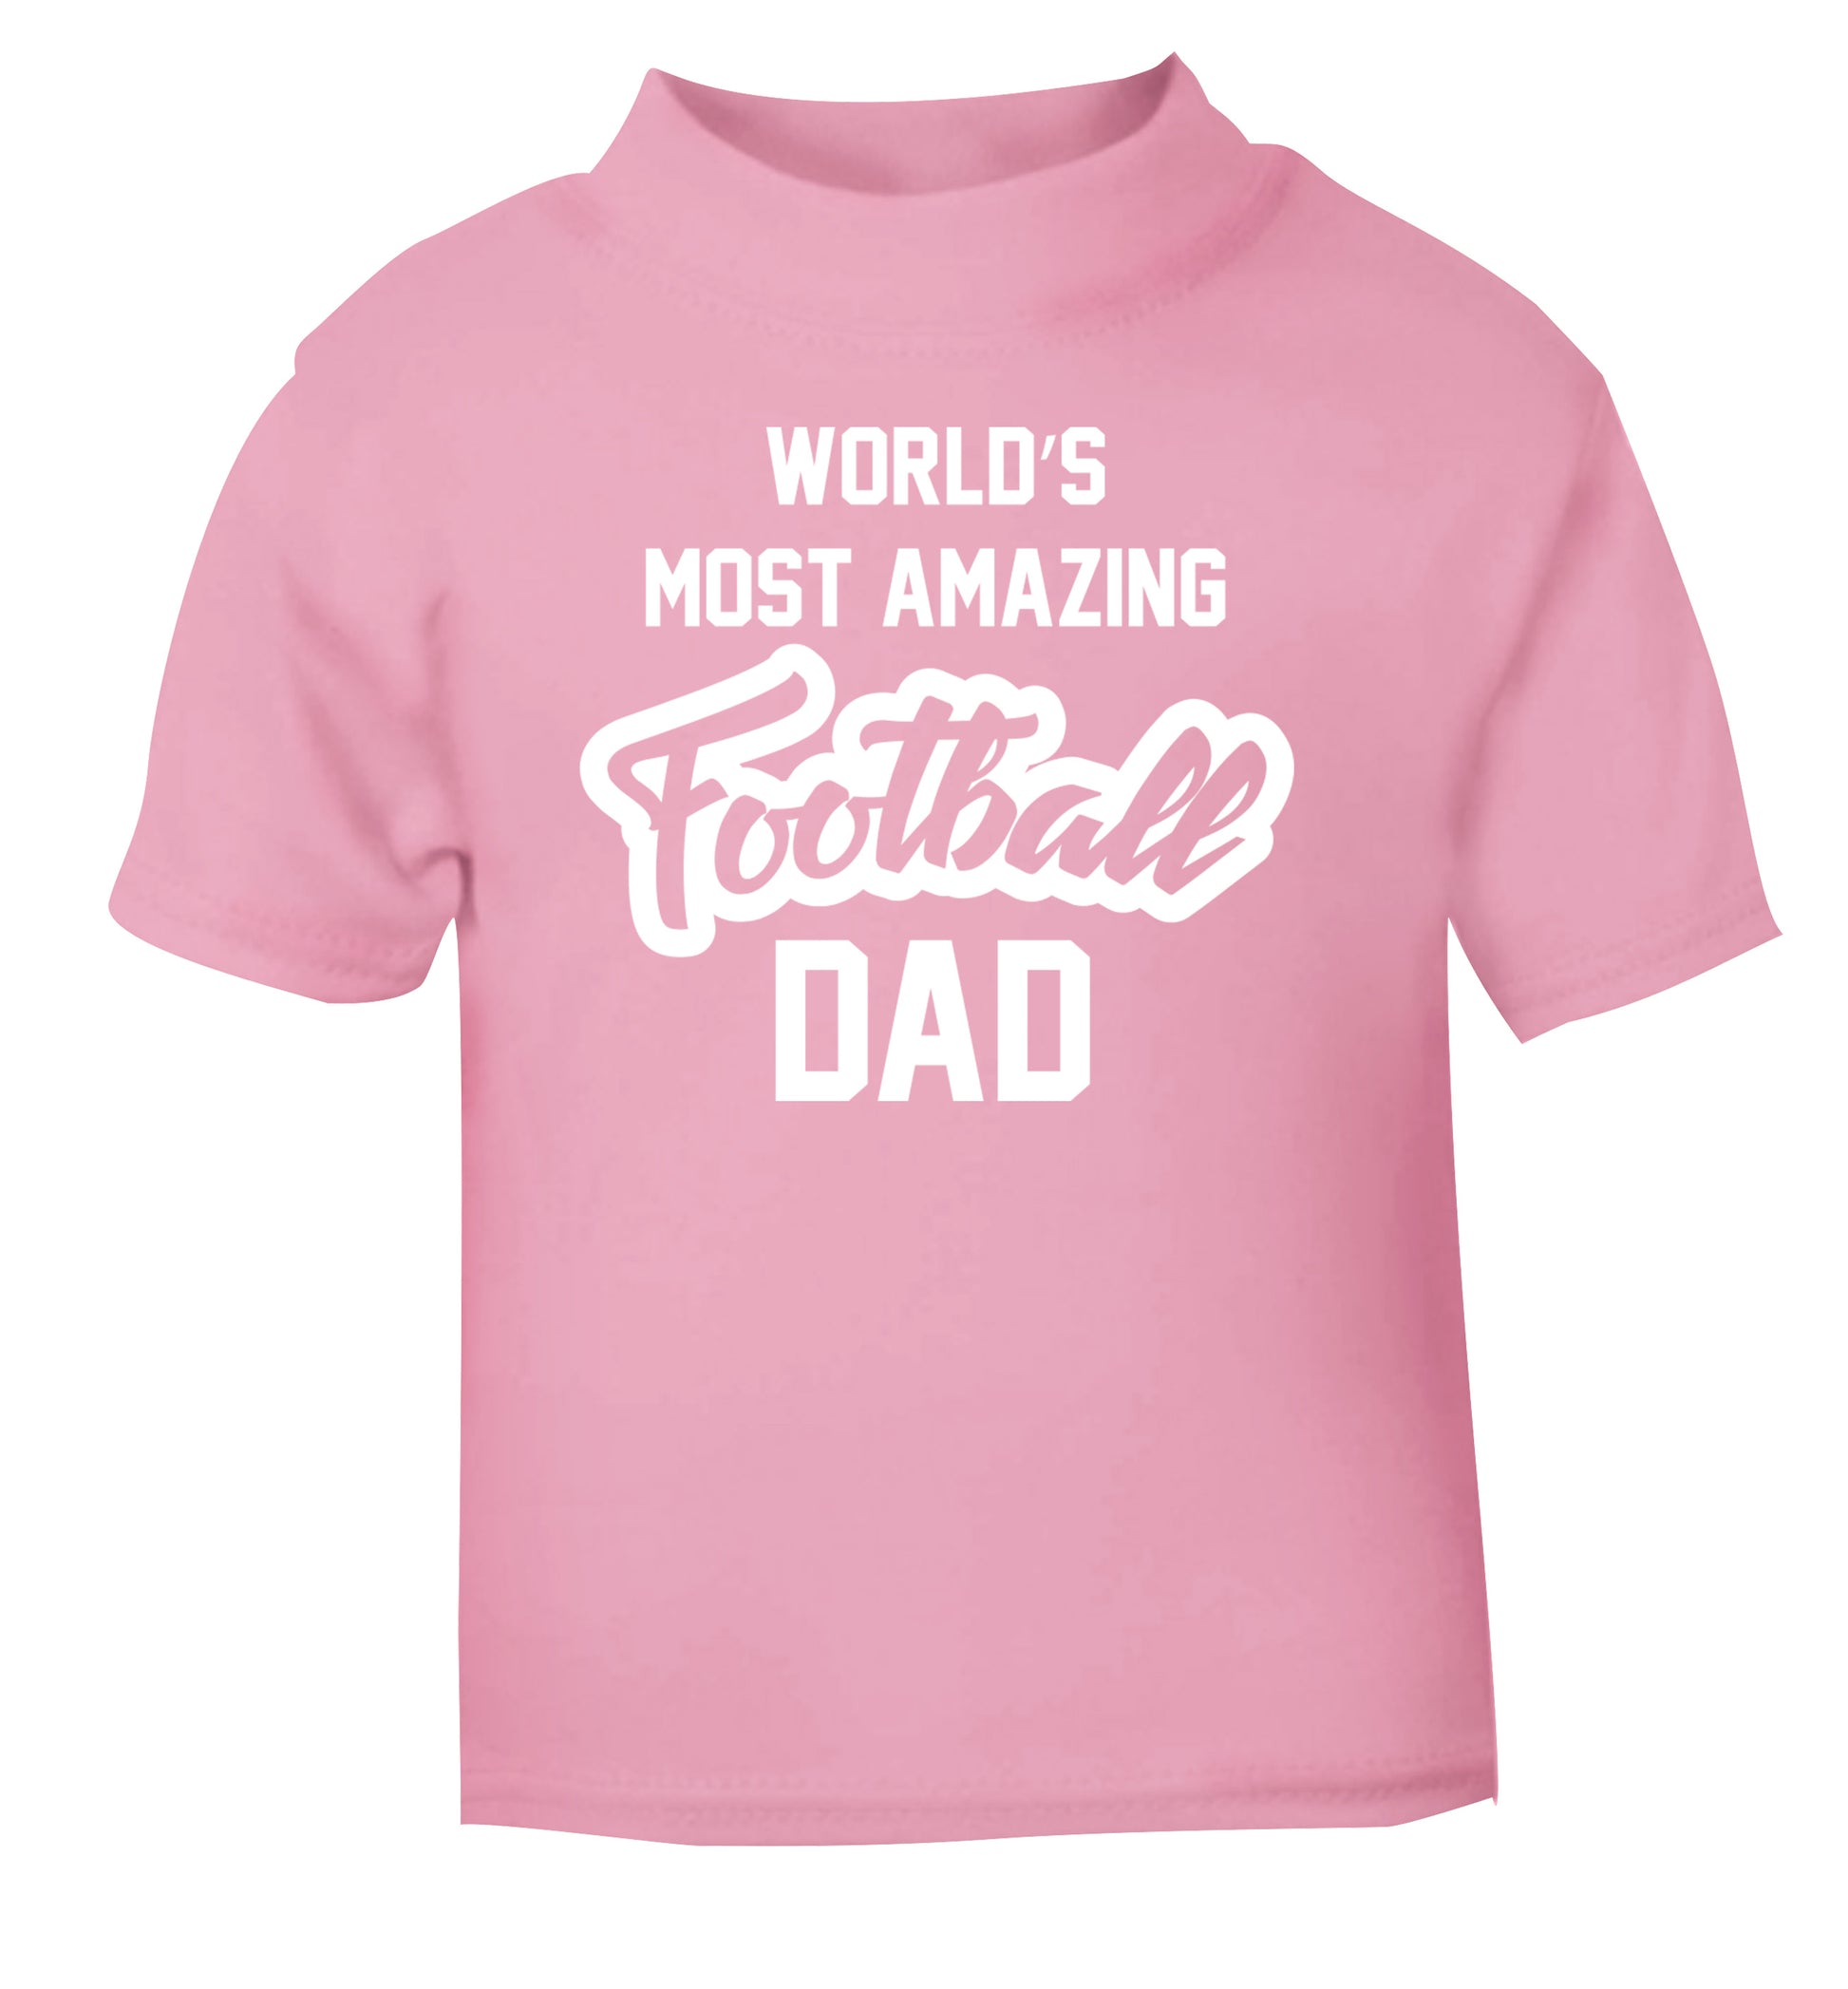 Worlds most amazing football dad light pink Baby Toddler Tshirt 2 Years